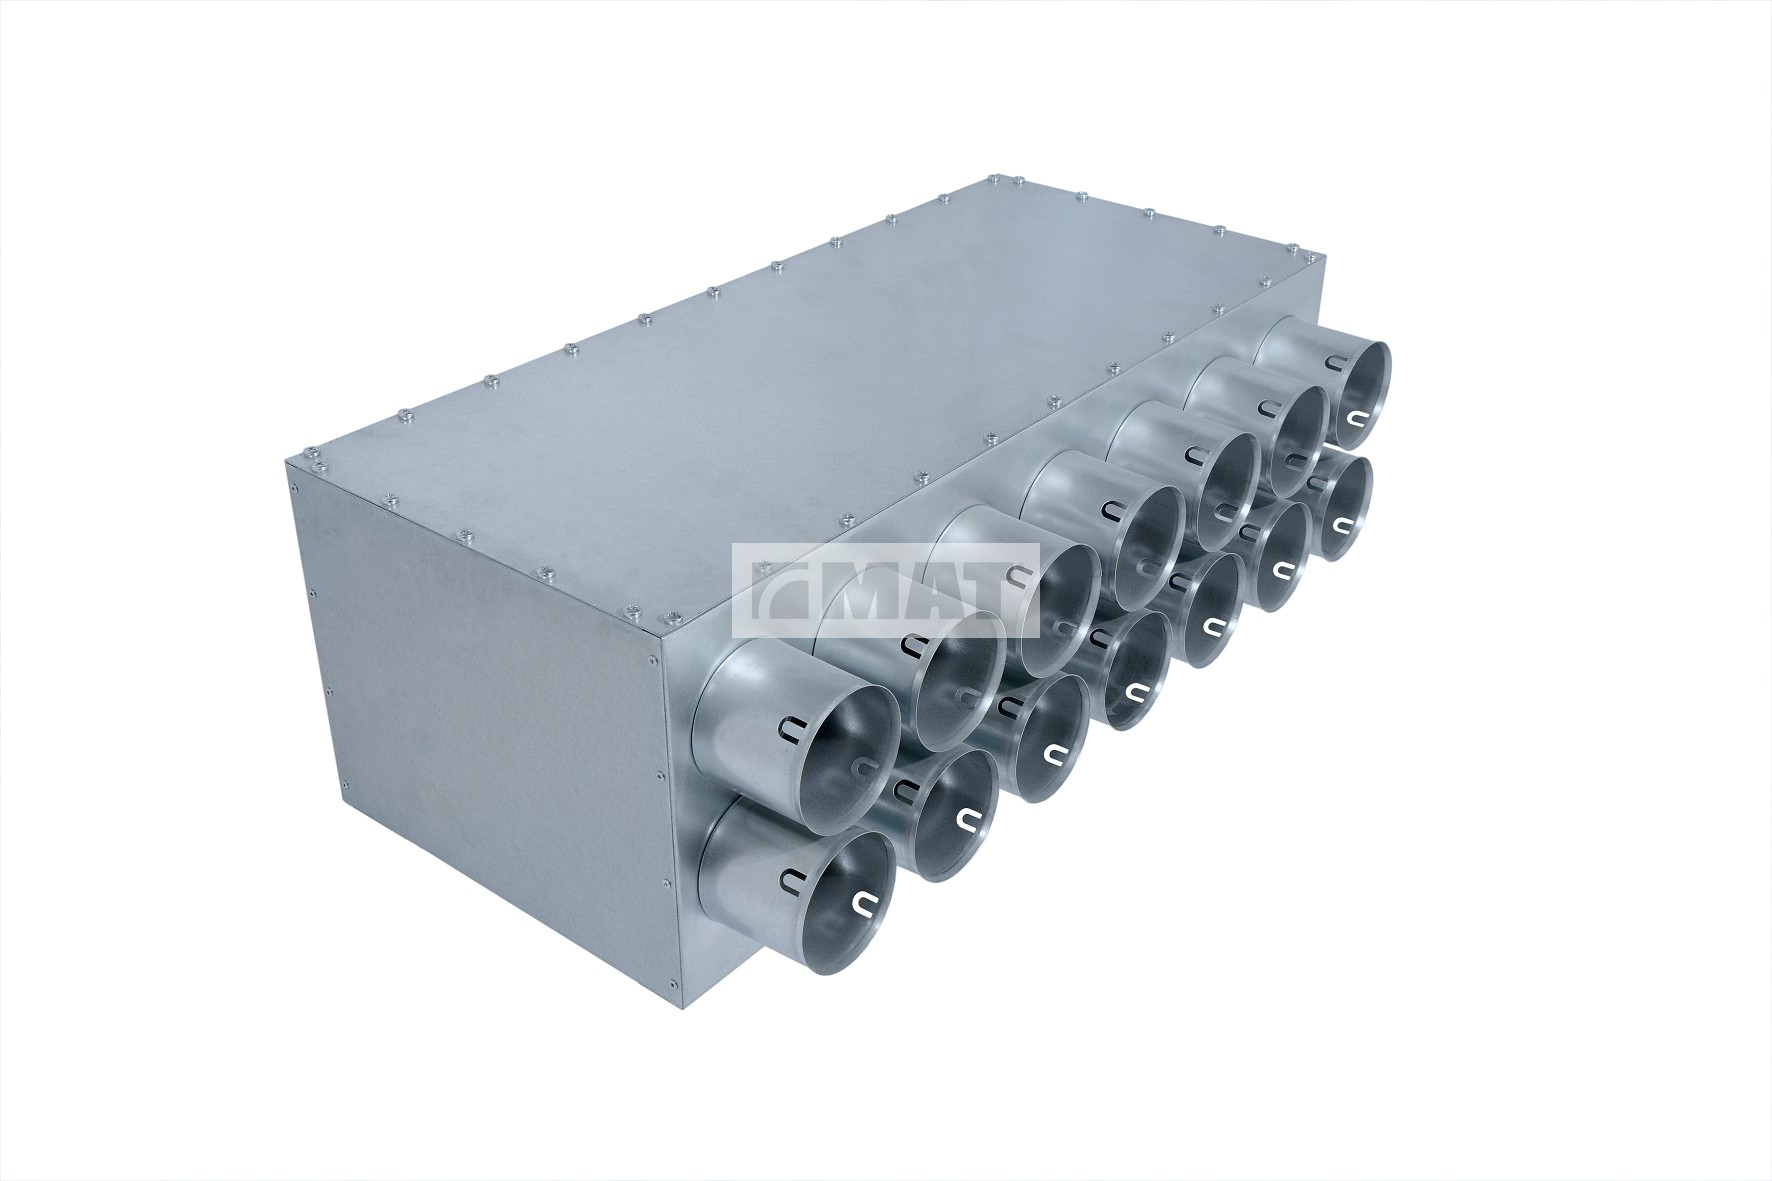 Direct distribution box, 14 outlets / inlets